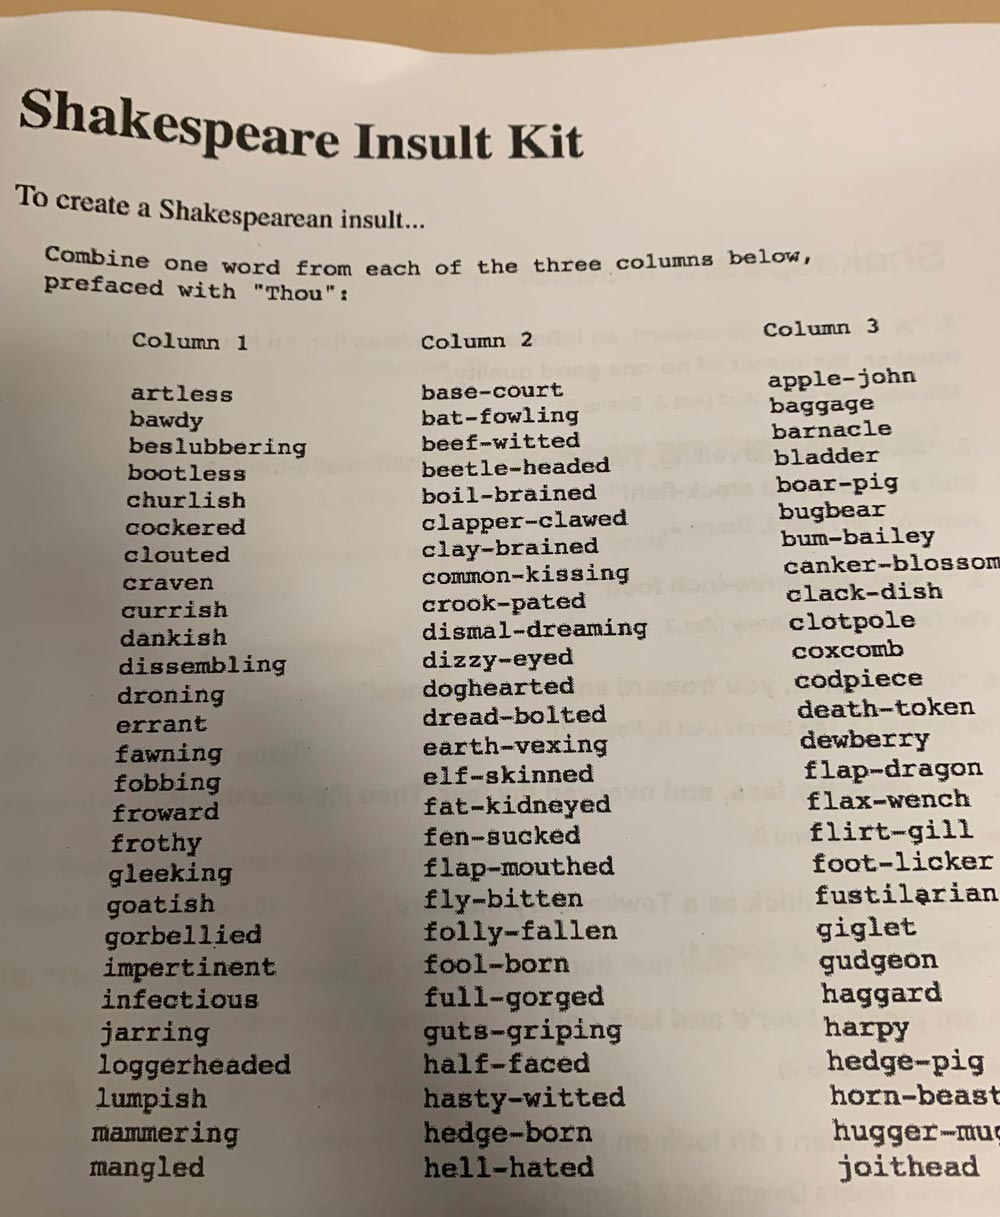 To create a Shakespearean insult...